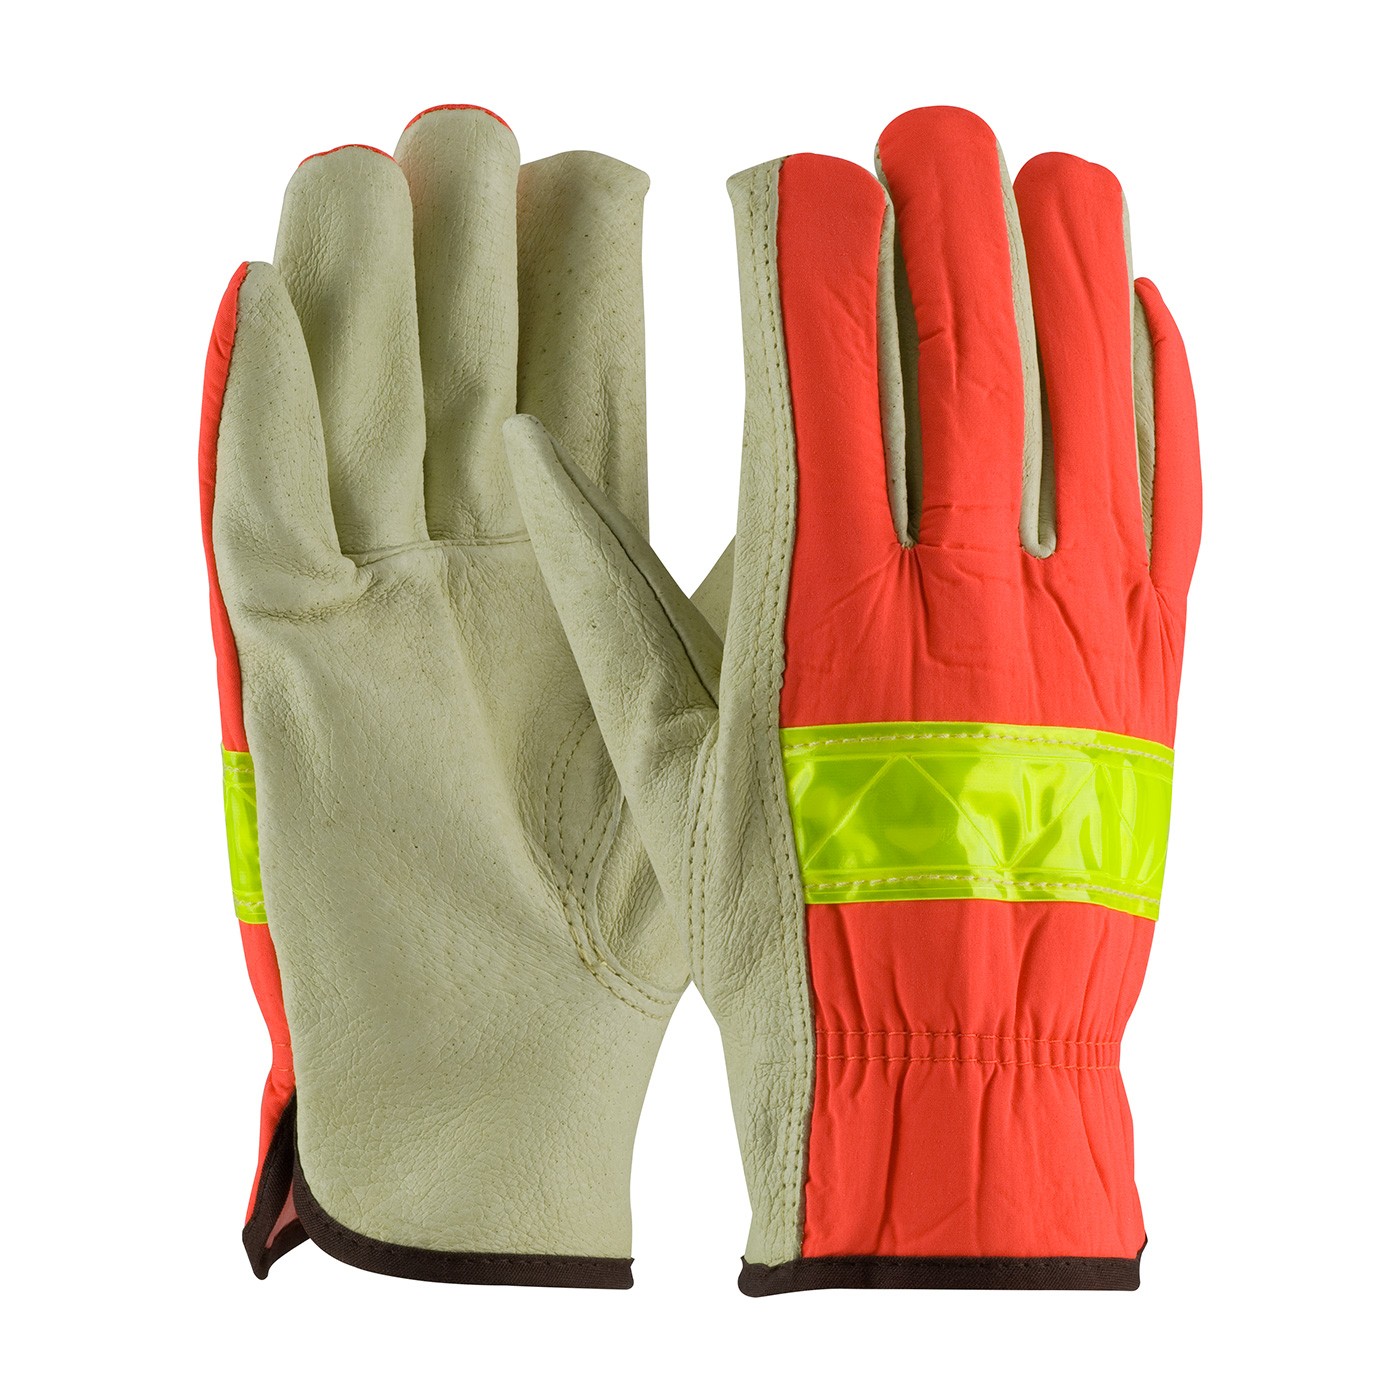 PIP® Top Grain Pigskin Leather Palm Drivers Glove with Hi-Vis Nylon Back - Open Cuff  (#125-368)